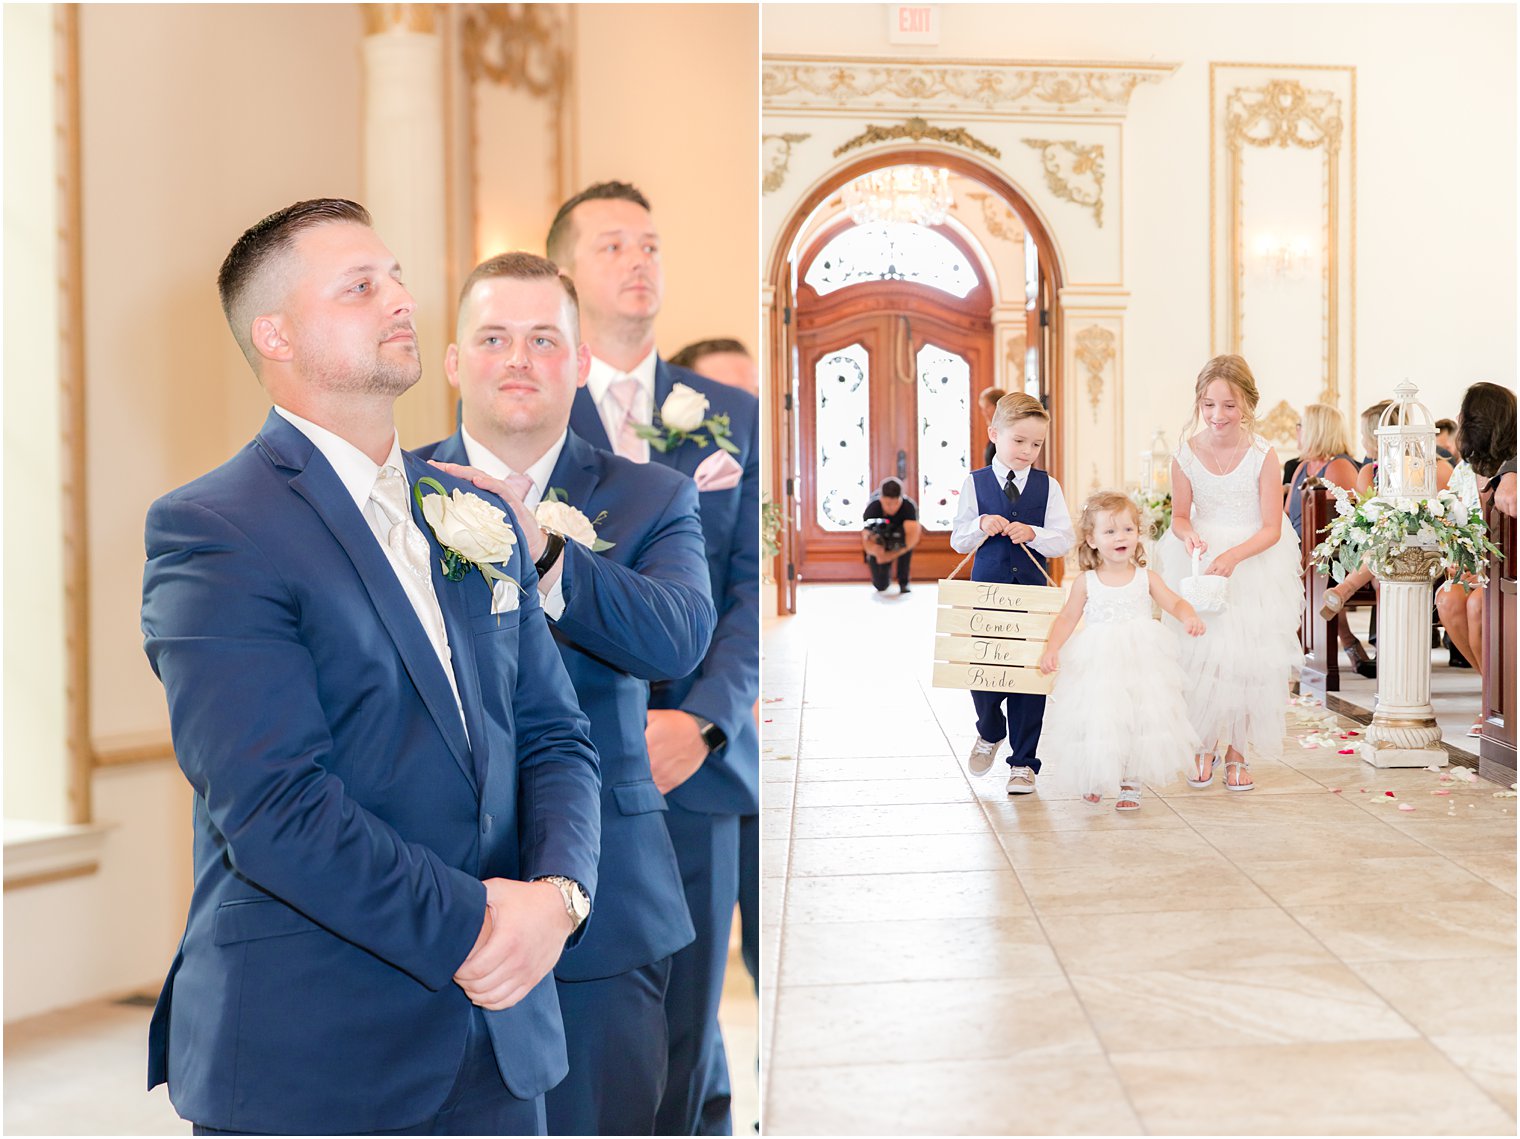 flower girl and ring bearers walk down aisle to uncle during wedding ceremony in chapel at Brigalia's